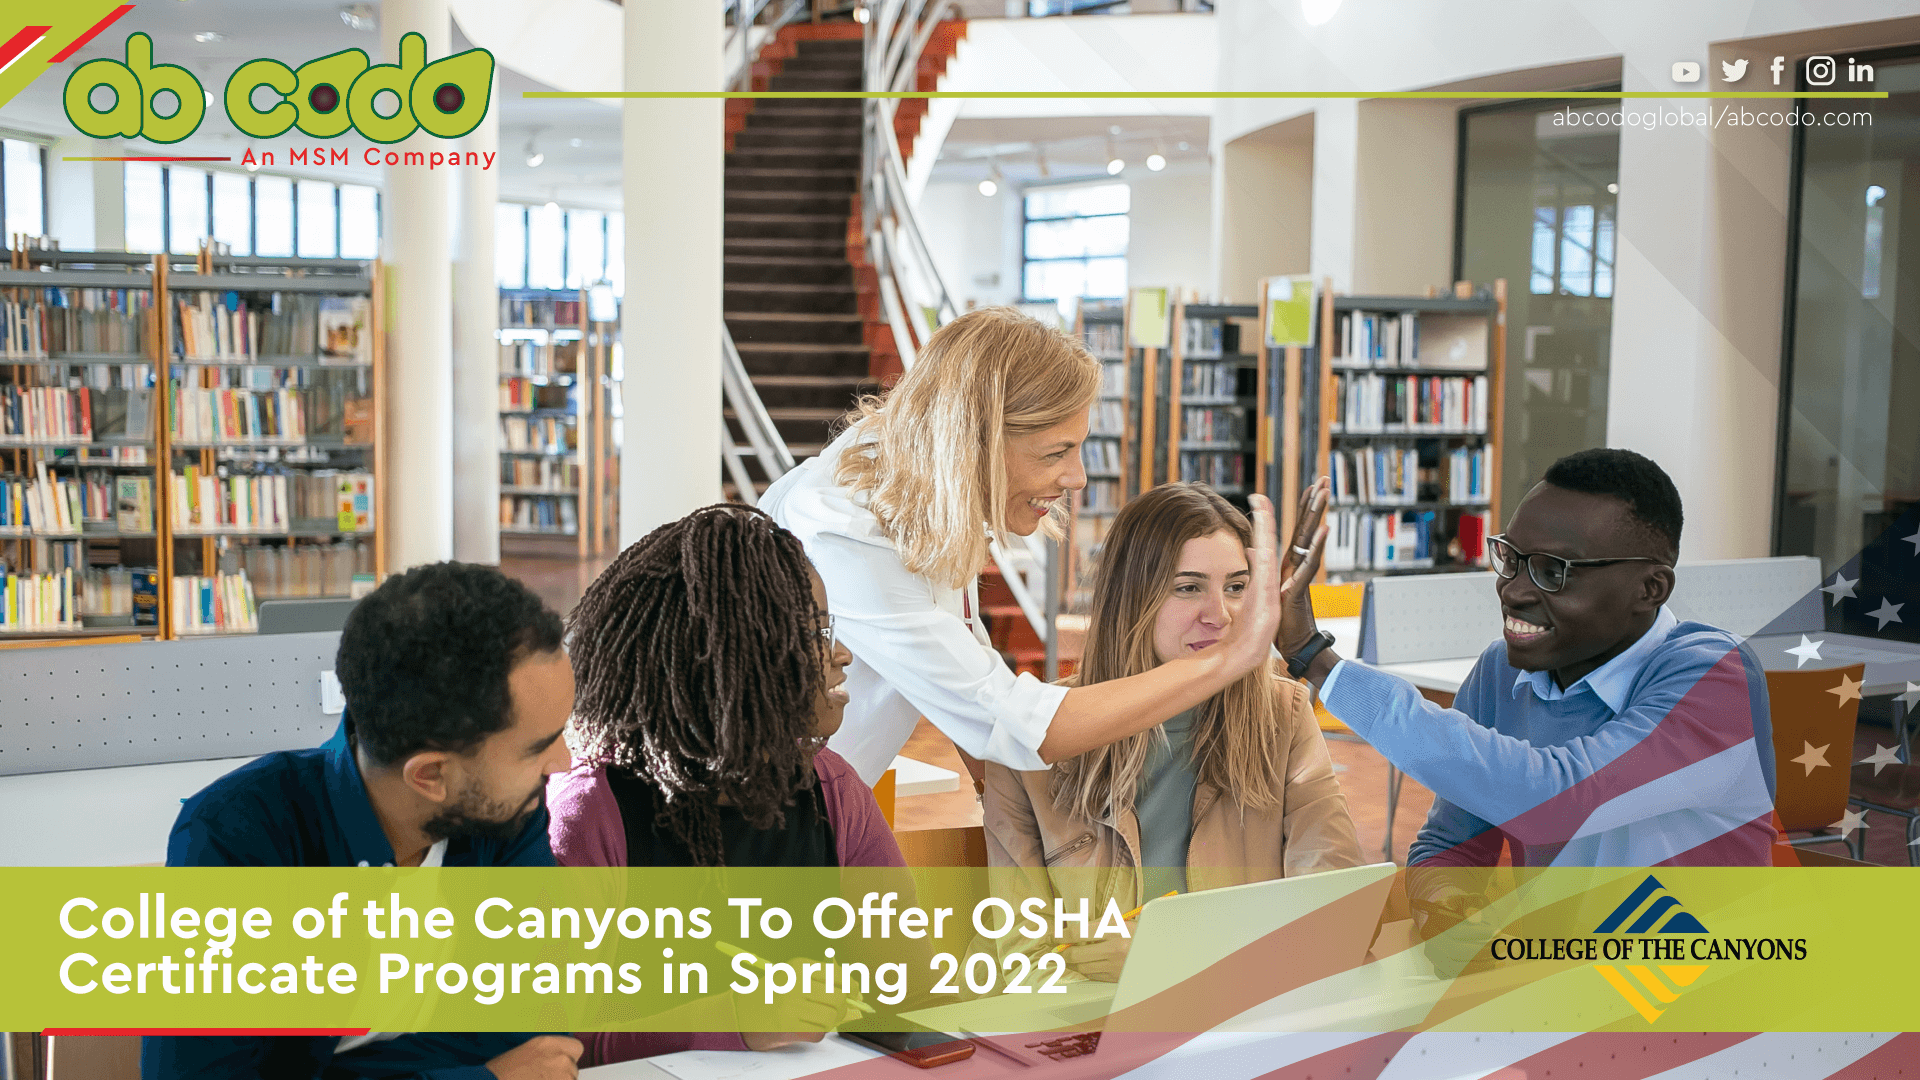 College of the Canyons To Offer OSHA Certificate Programs in Spring 2022